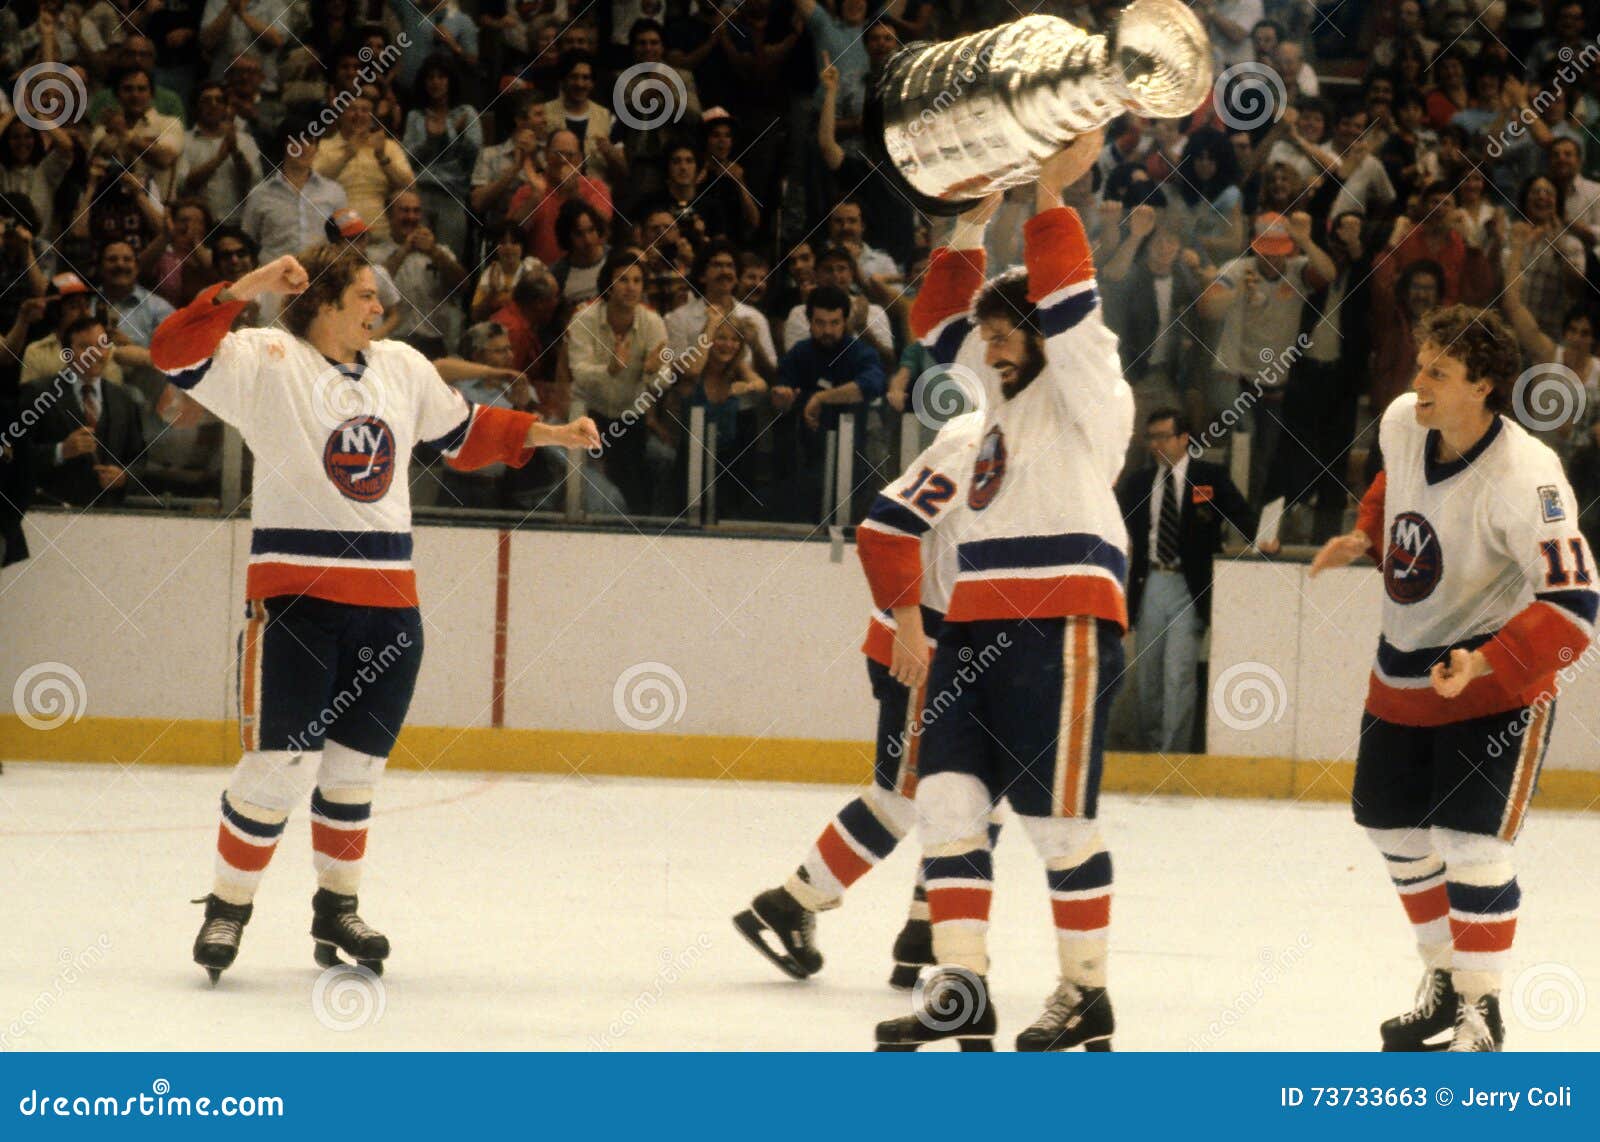 How did the New York Islanders win four Stanley Cups in a row? - Quora